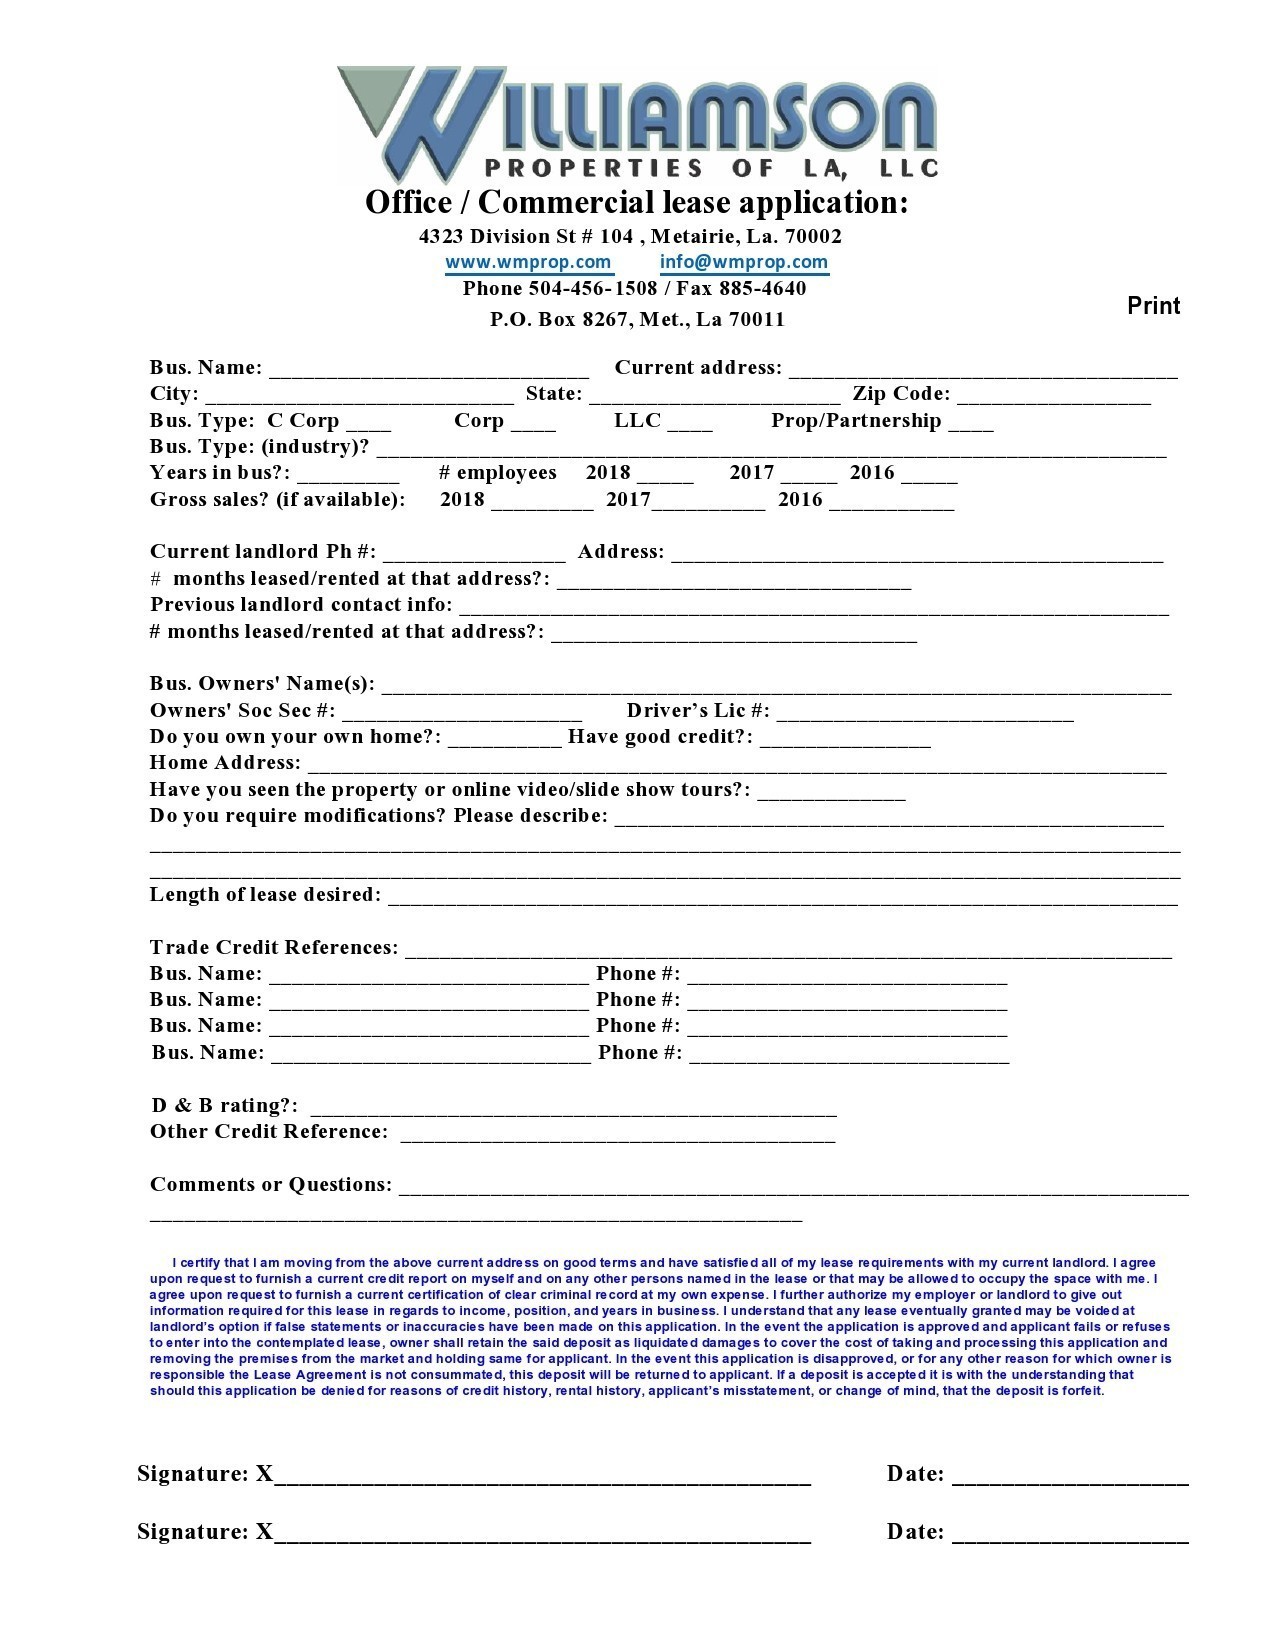 Free commercial lease application 04